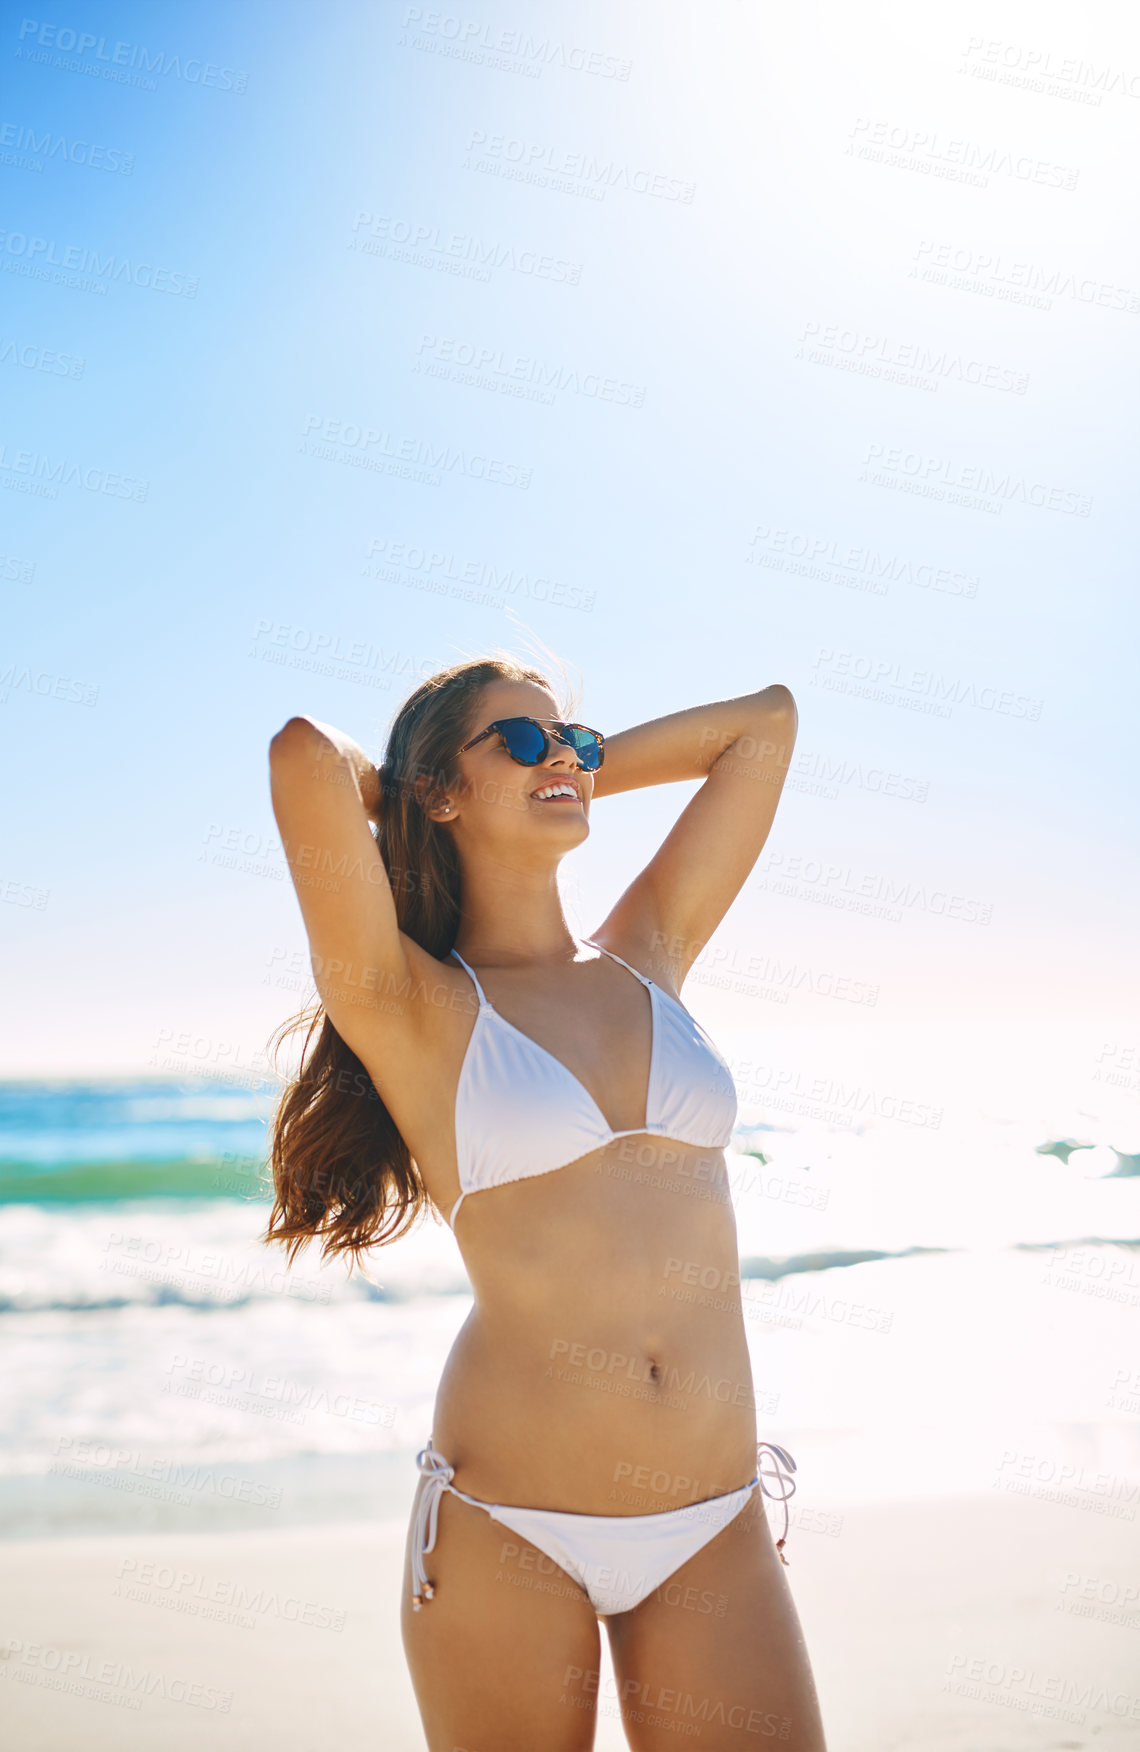 Buy stock photo Shot of a beautiful young woman enjoying the day at the beach